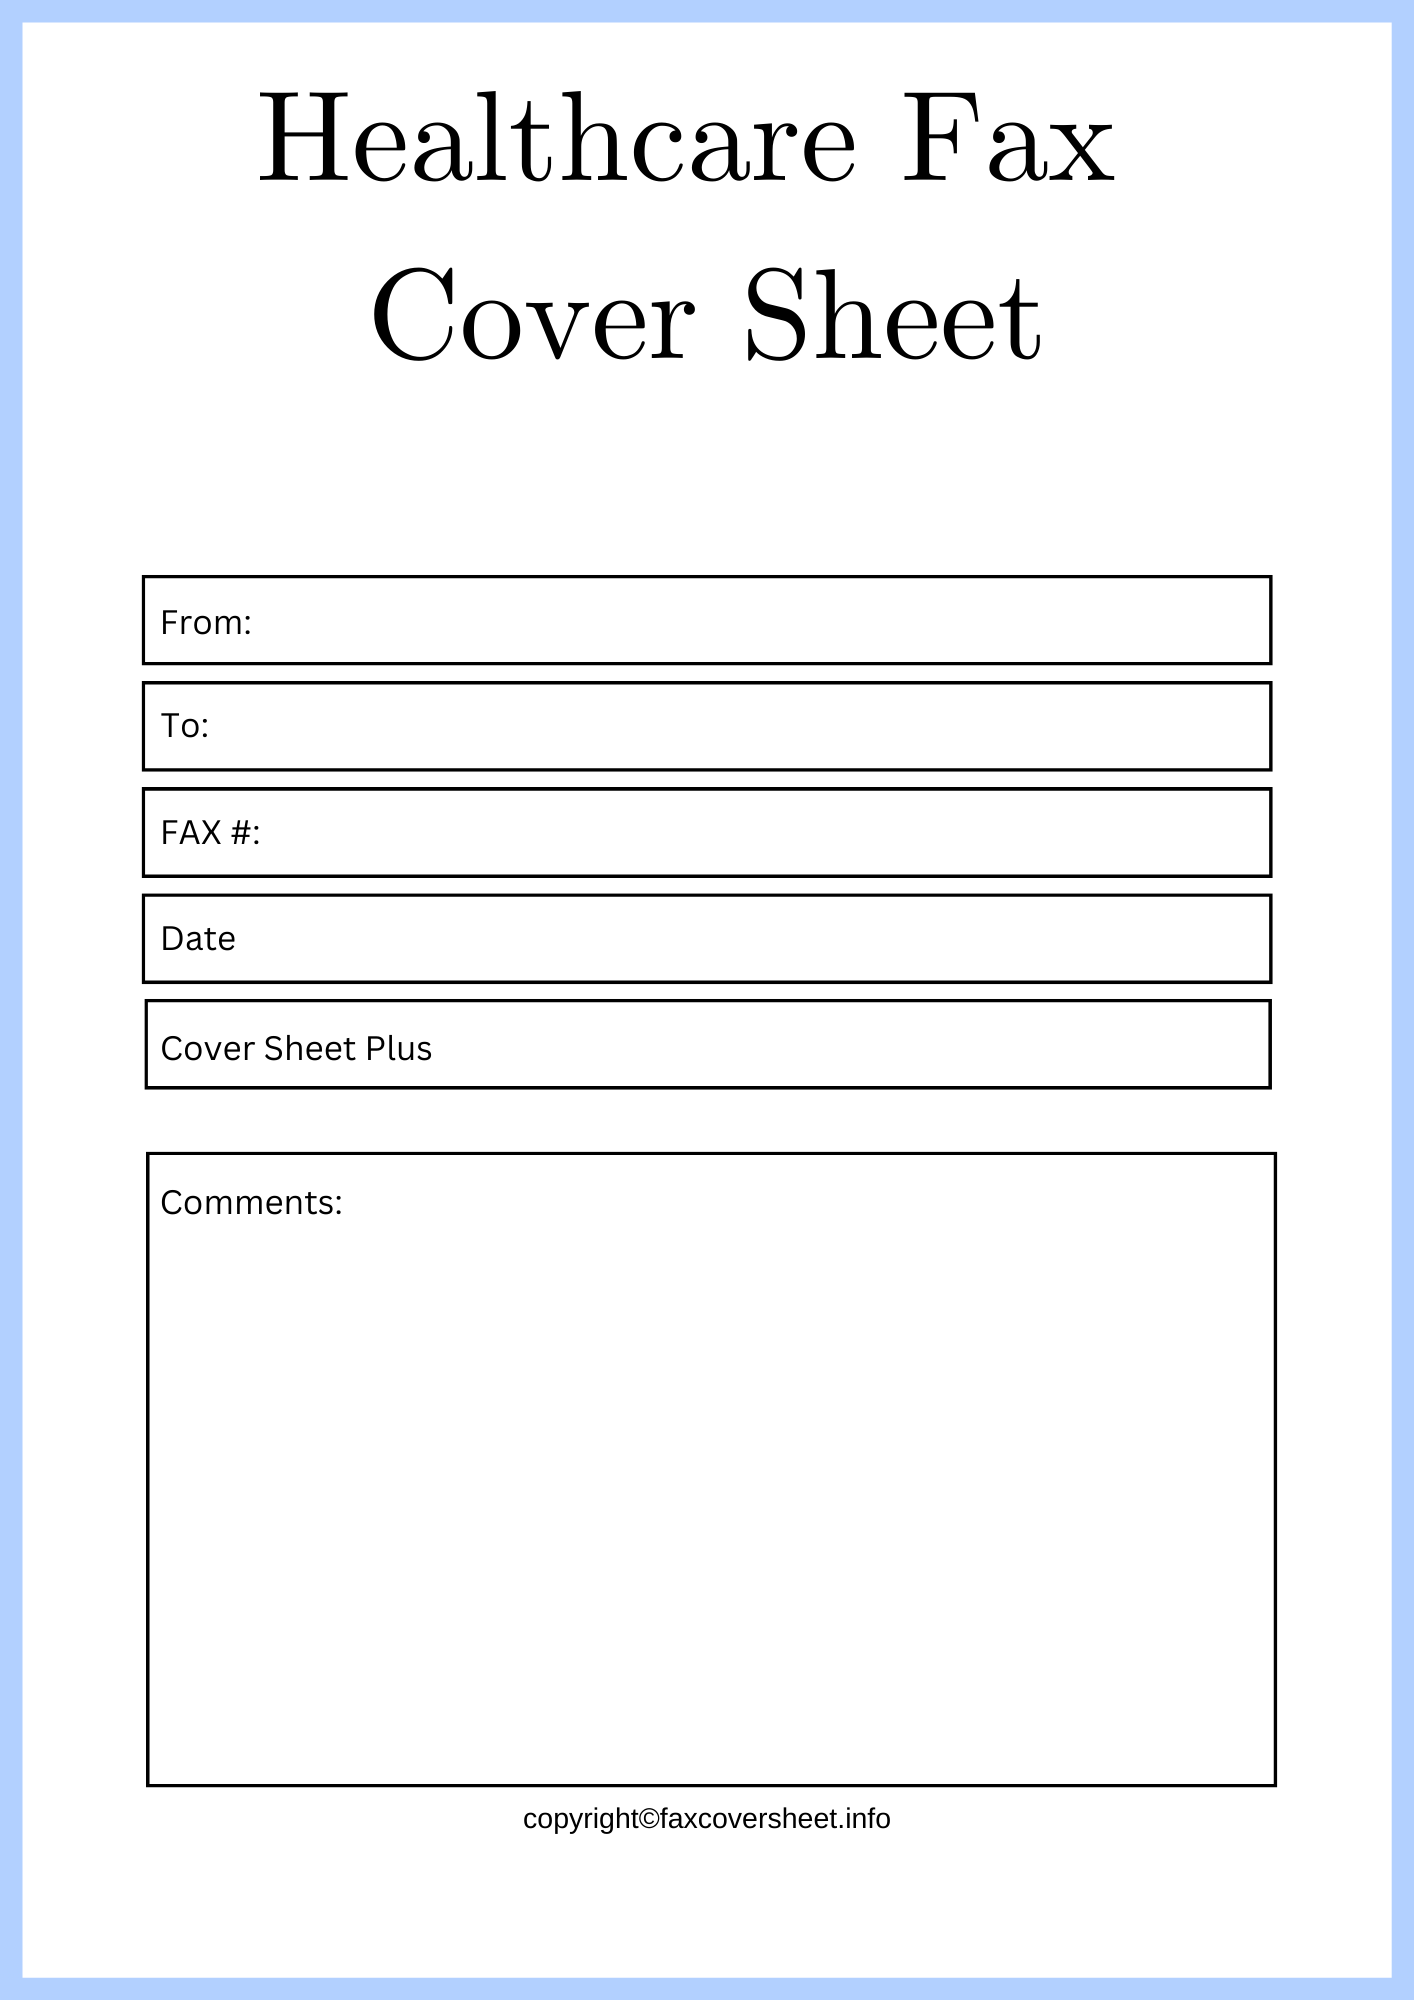 Healthcare Fax Cover Sheet Templates Printable in PDF & Word